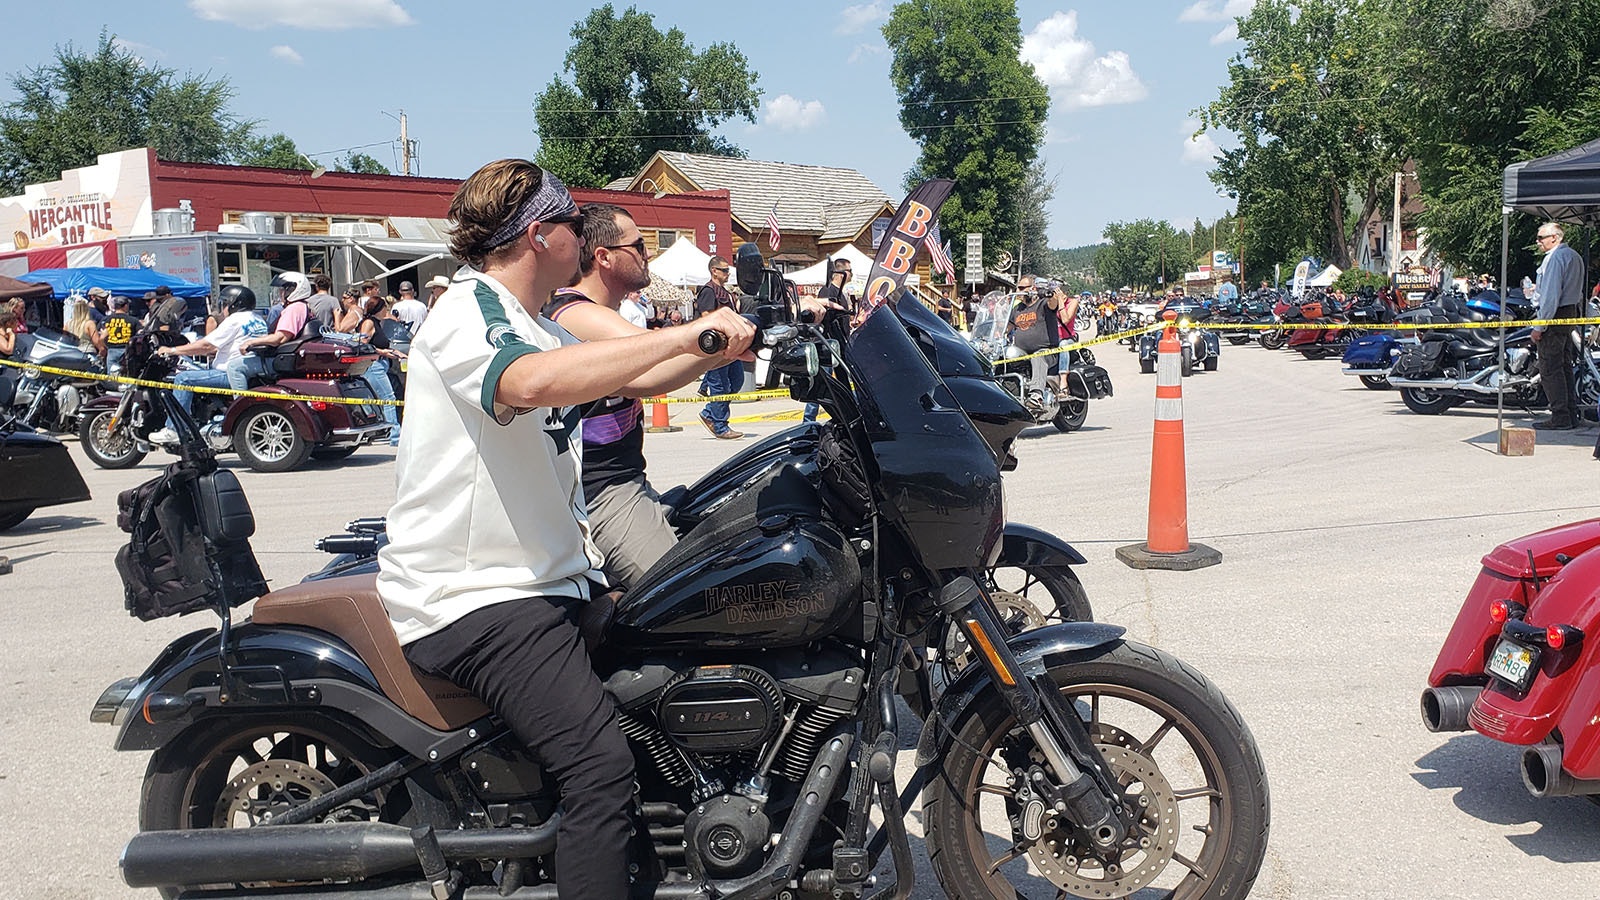 The annual Ham-N-Jam in Hulett is wall-to-wall bikers.